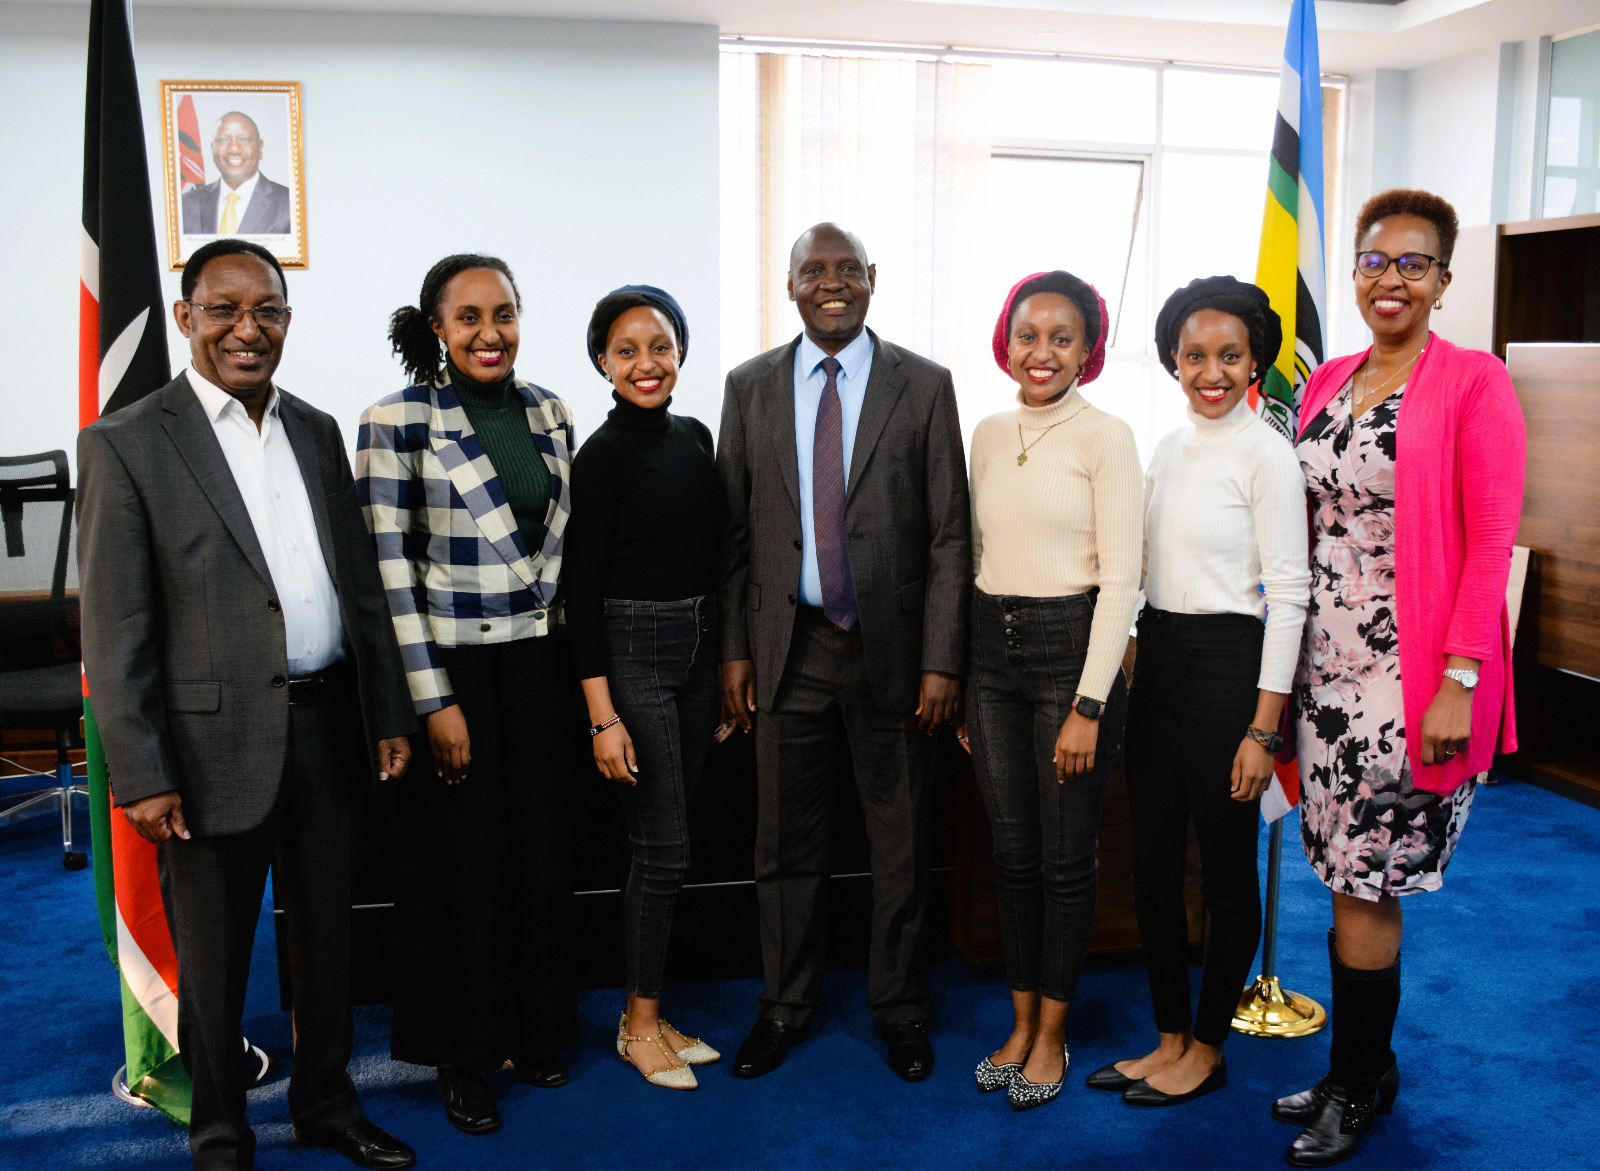 The Principal Secretary (PS), State Department for Tourism, John Ololtuaa, with Mr. and Mrs. Nicholas Moipei, with their daughters the Moipei sisters quartet, in his office today morning.